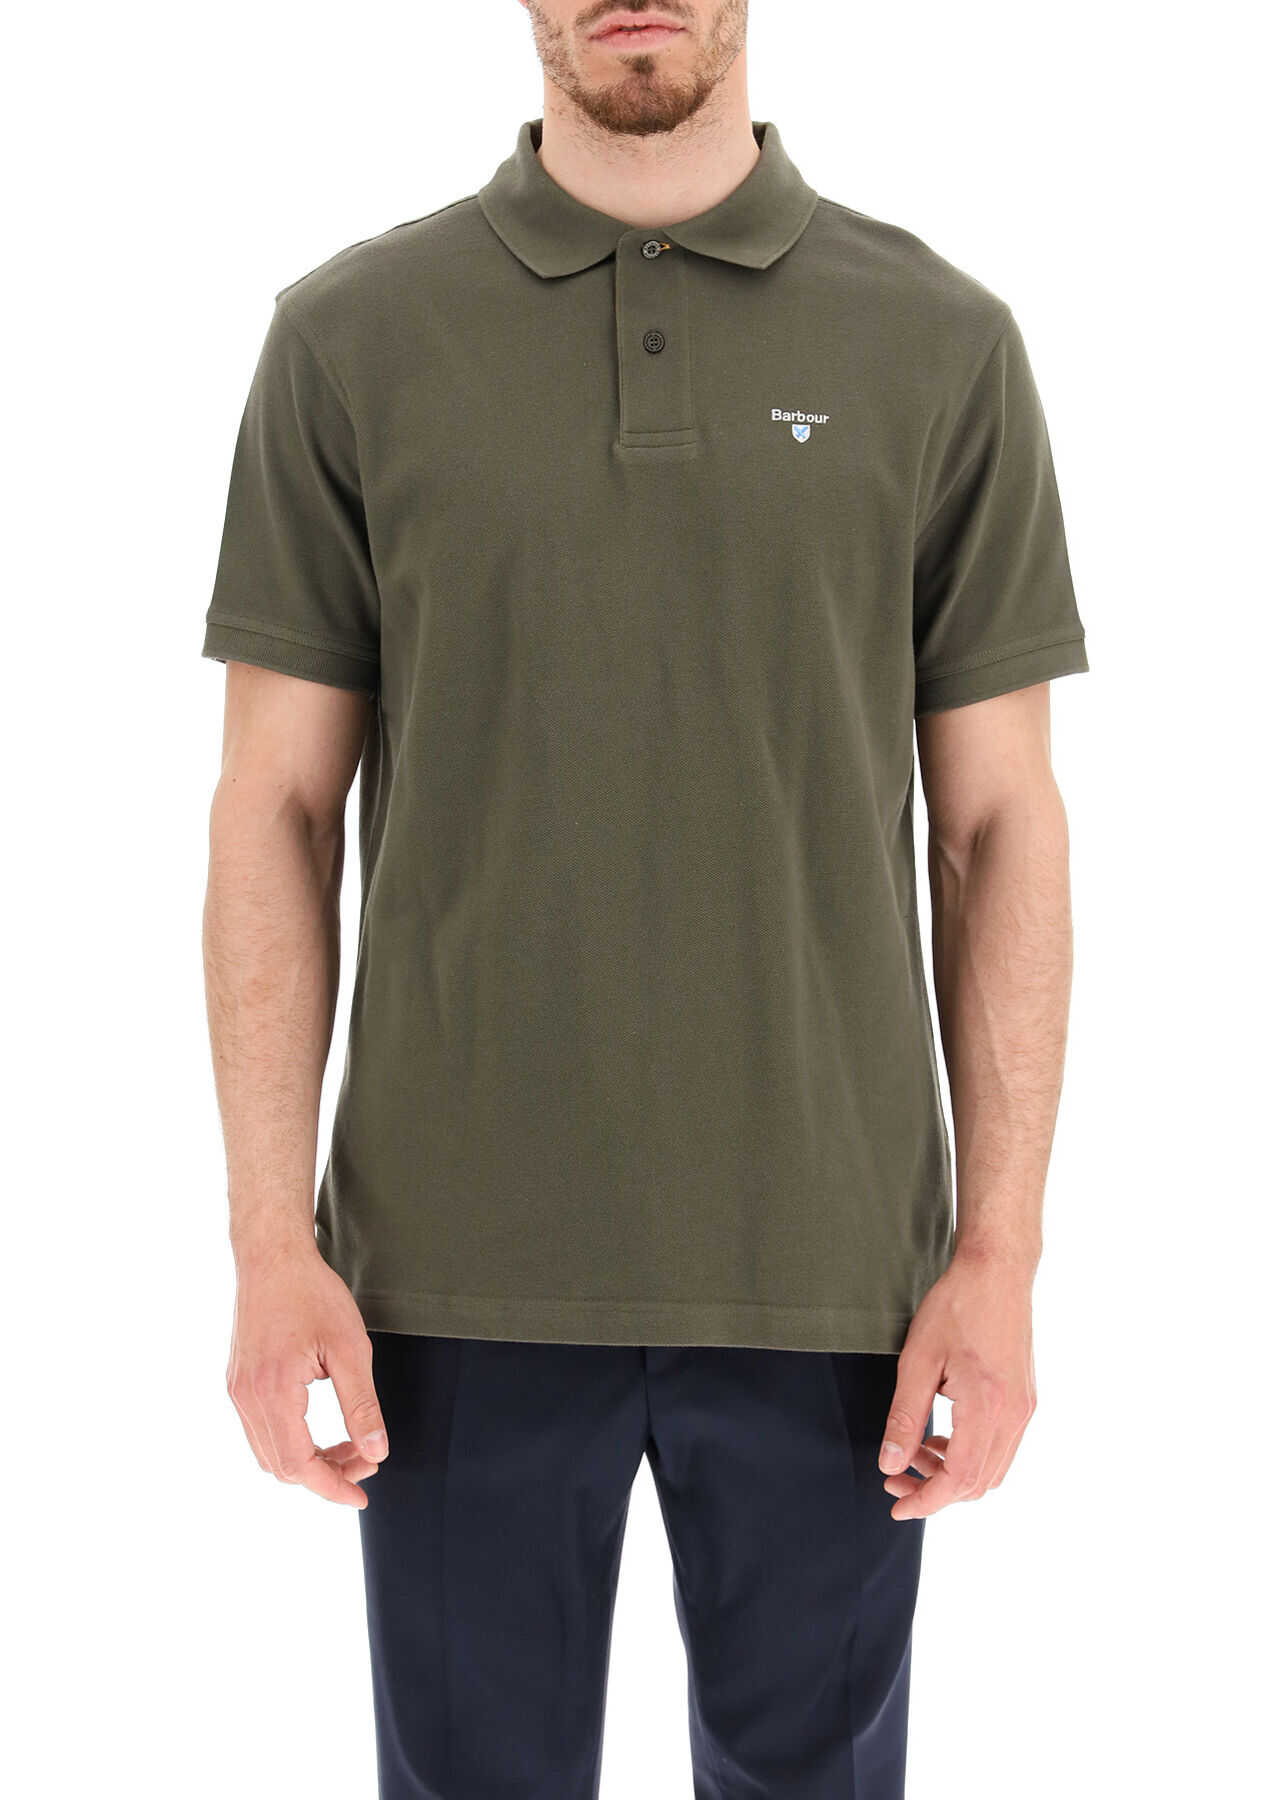 Barbour Piquet Polo Shirt With Tartan MML0012 DK OLIVE CLASSIC